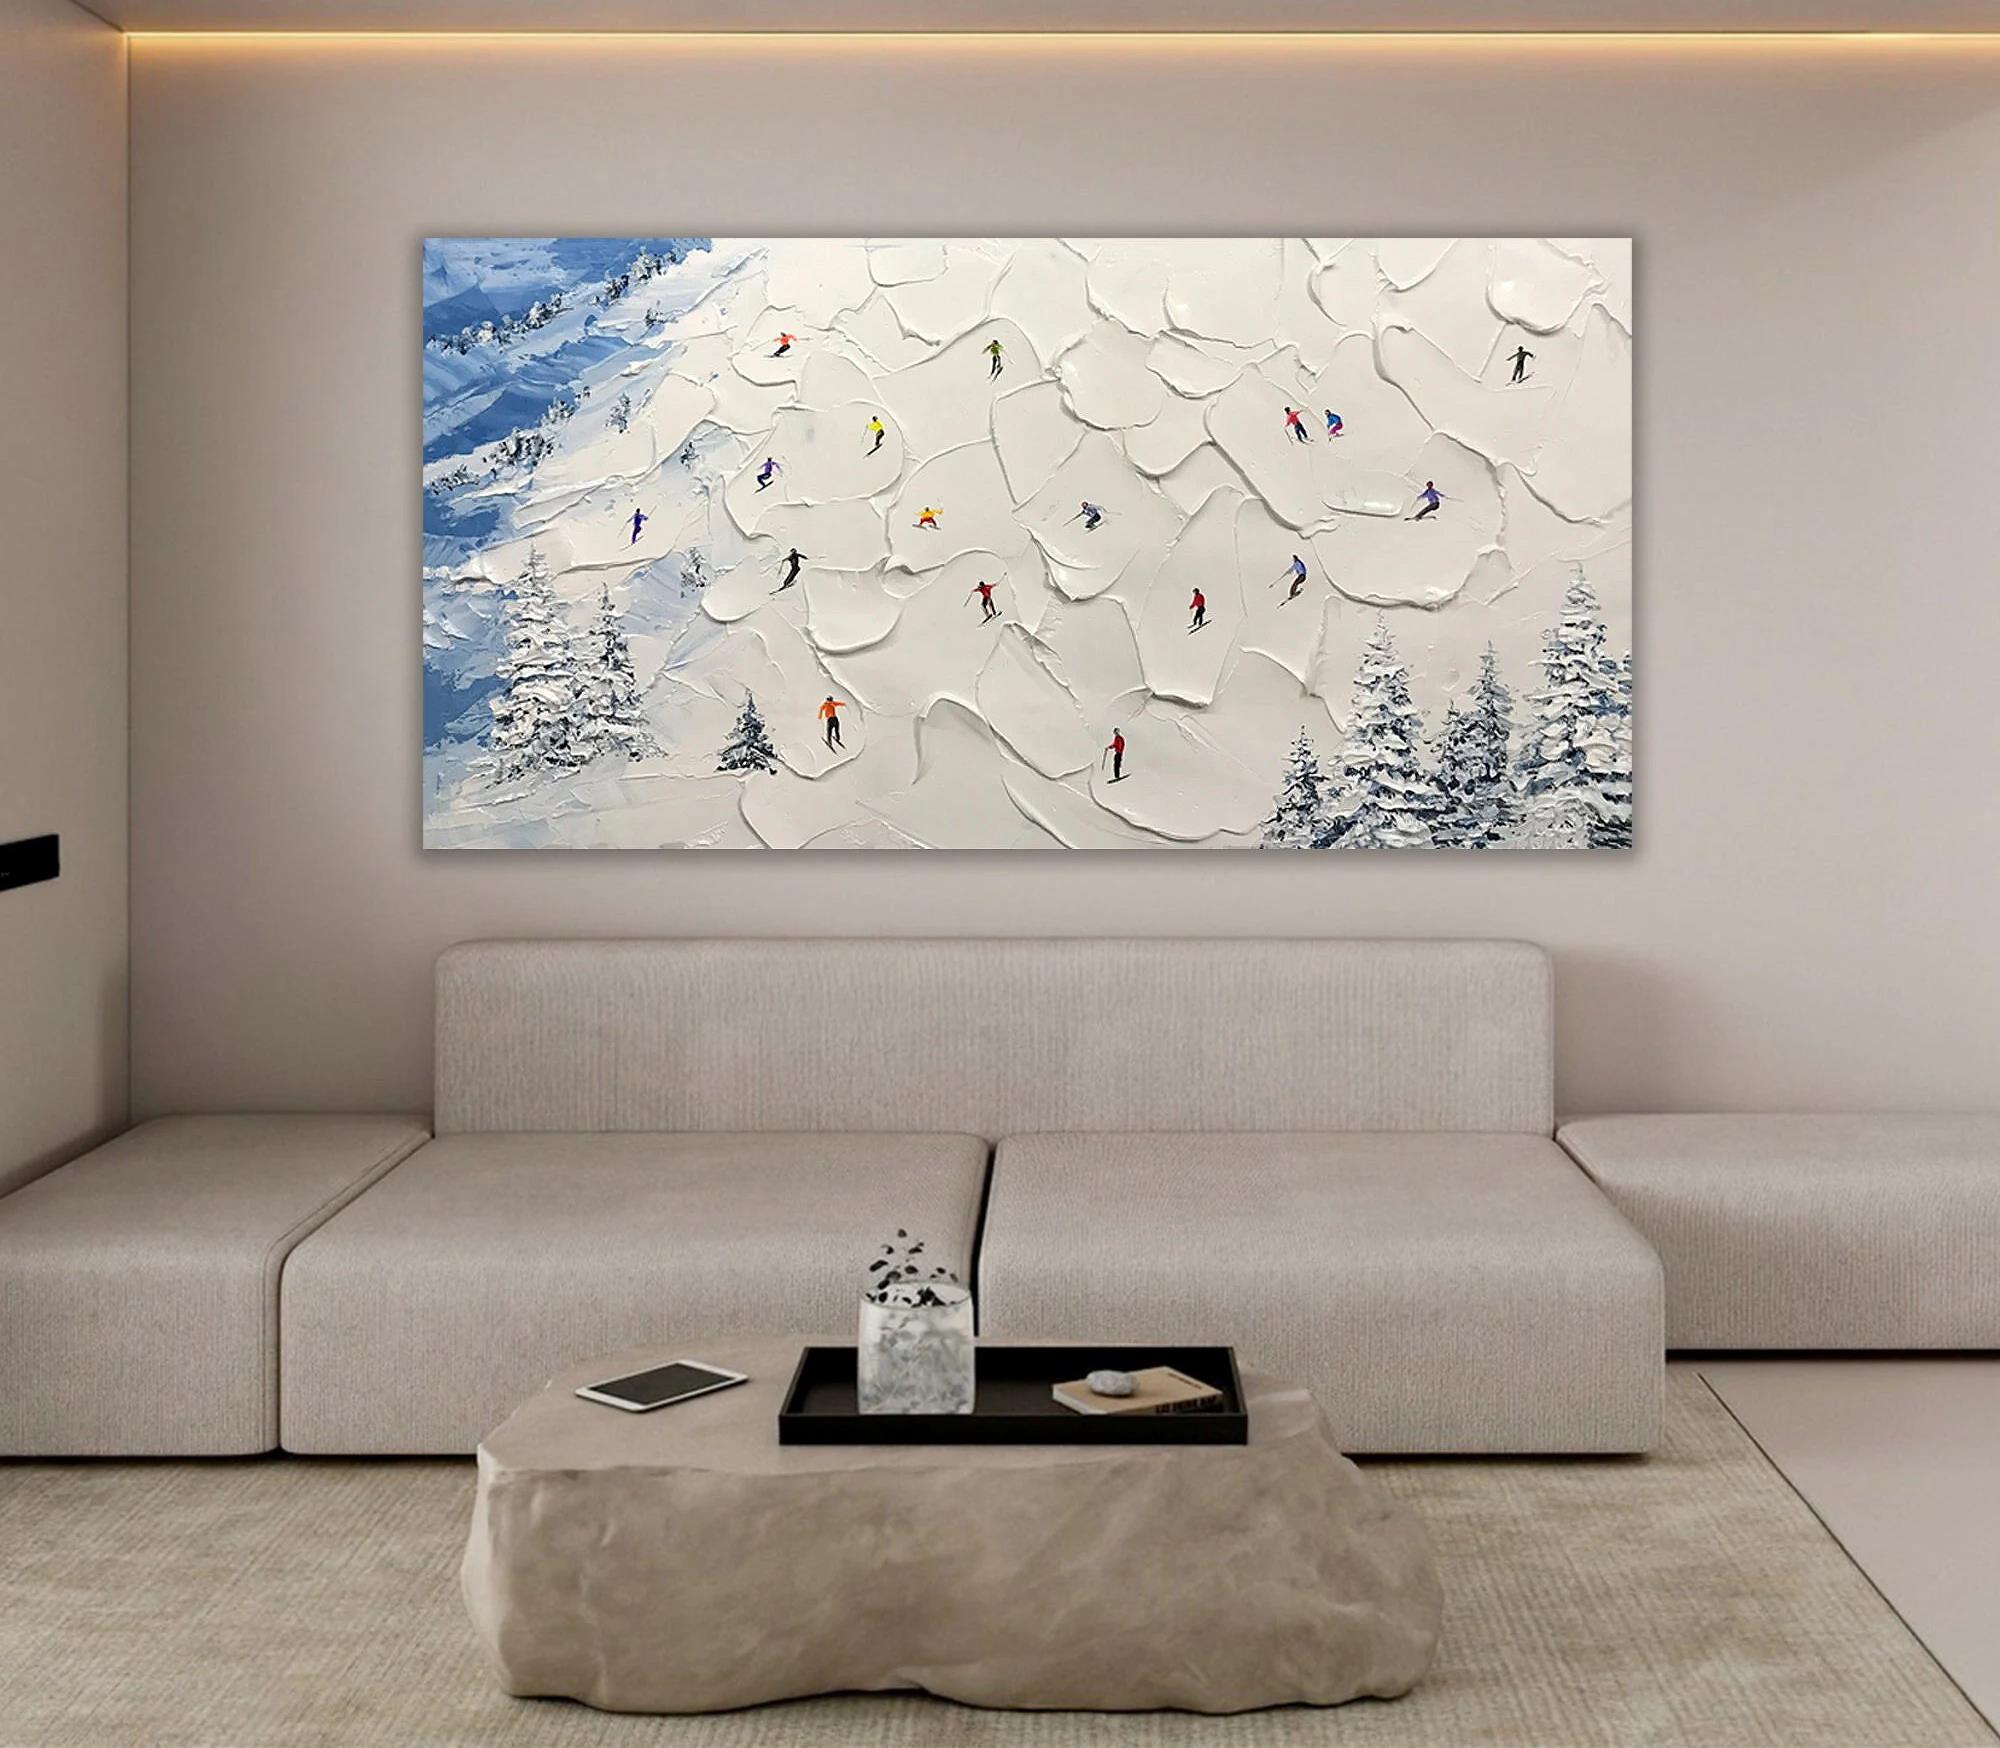 Skier on Snowy Mountain Wall Art Sport White Snow Skiing Room Decor by Knife 10 Oil Paintings